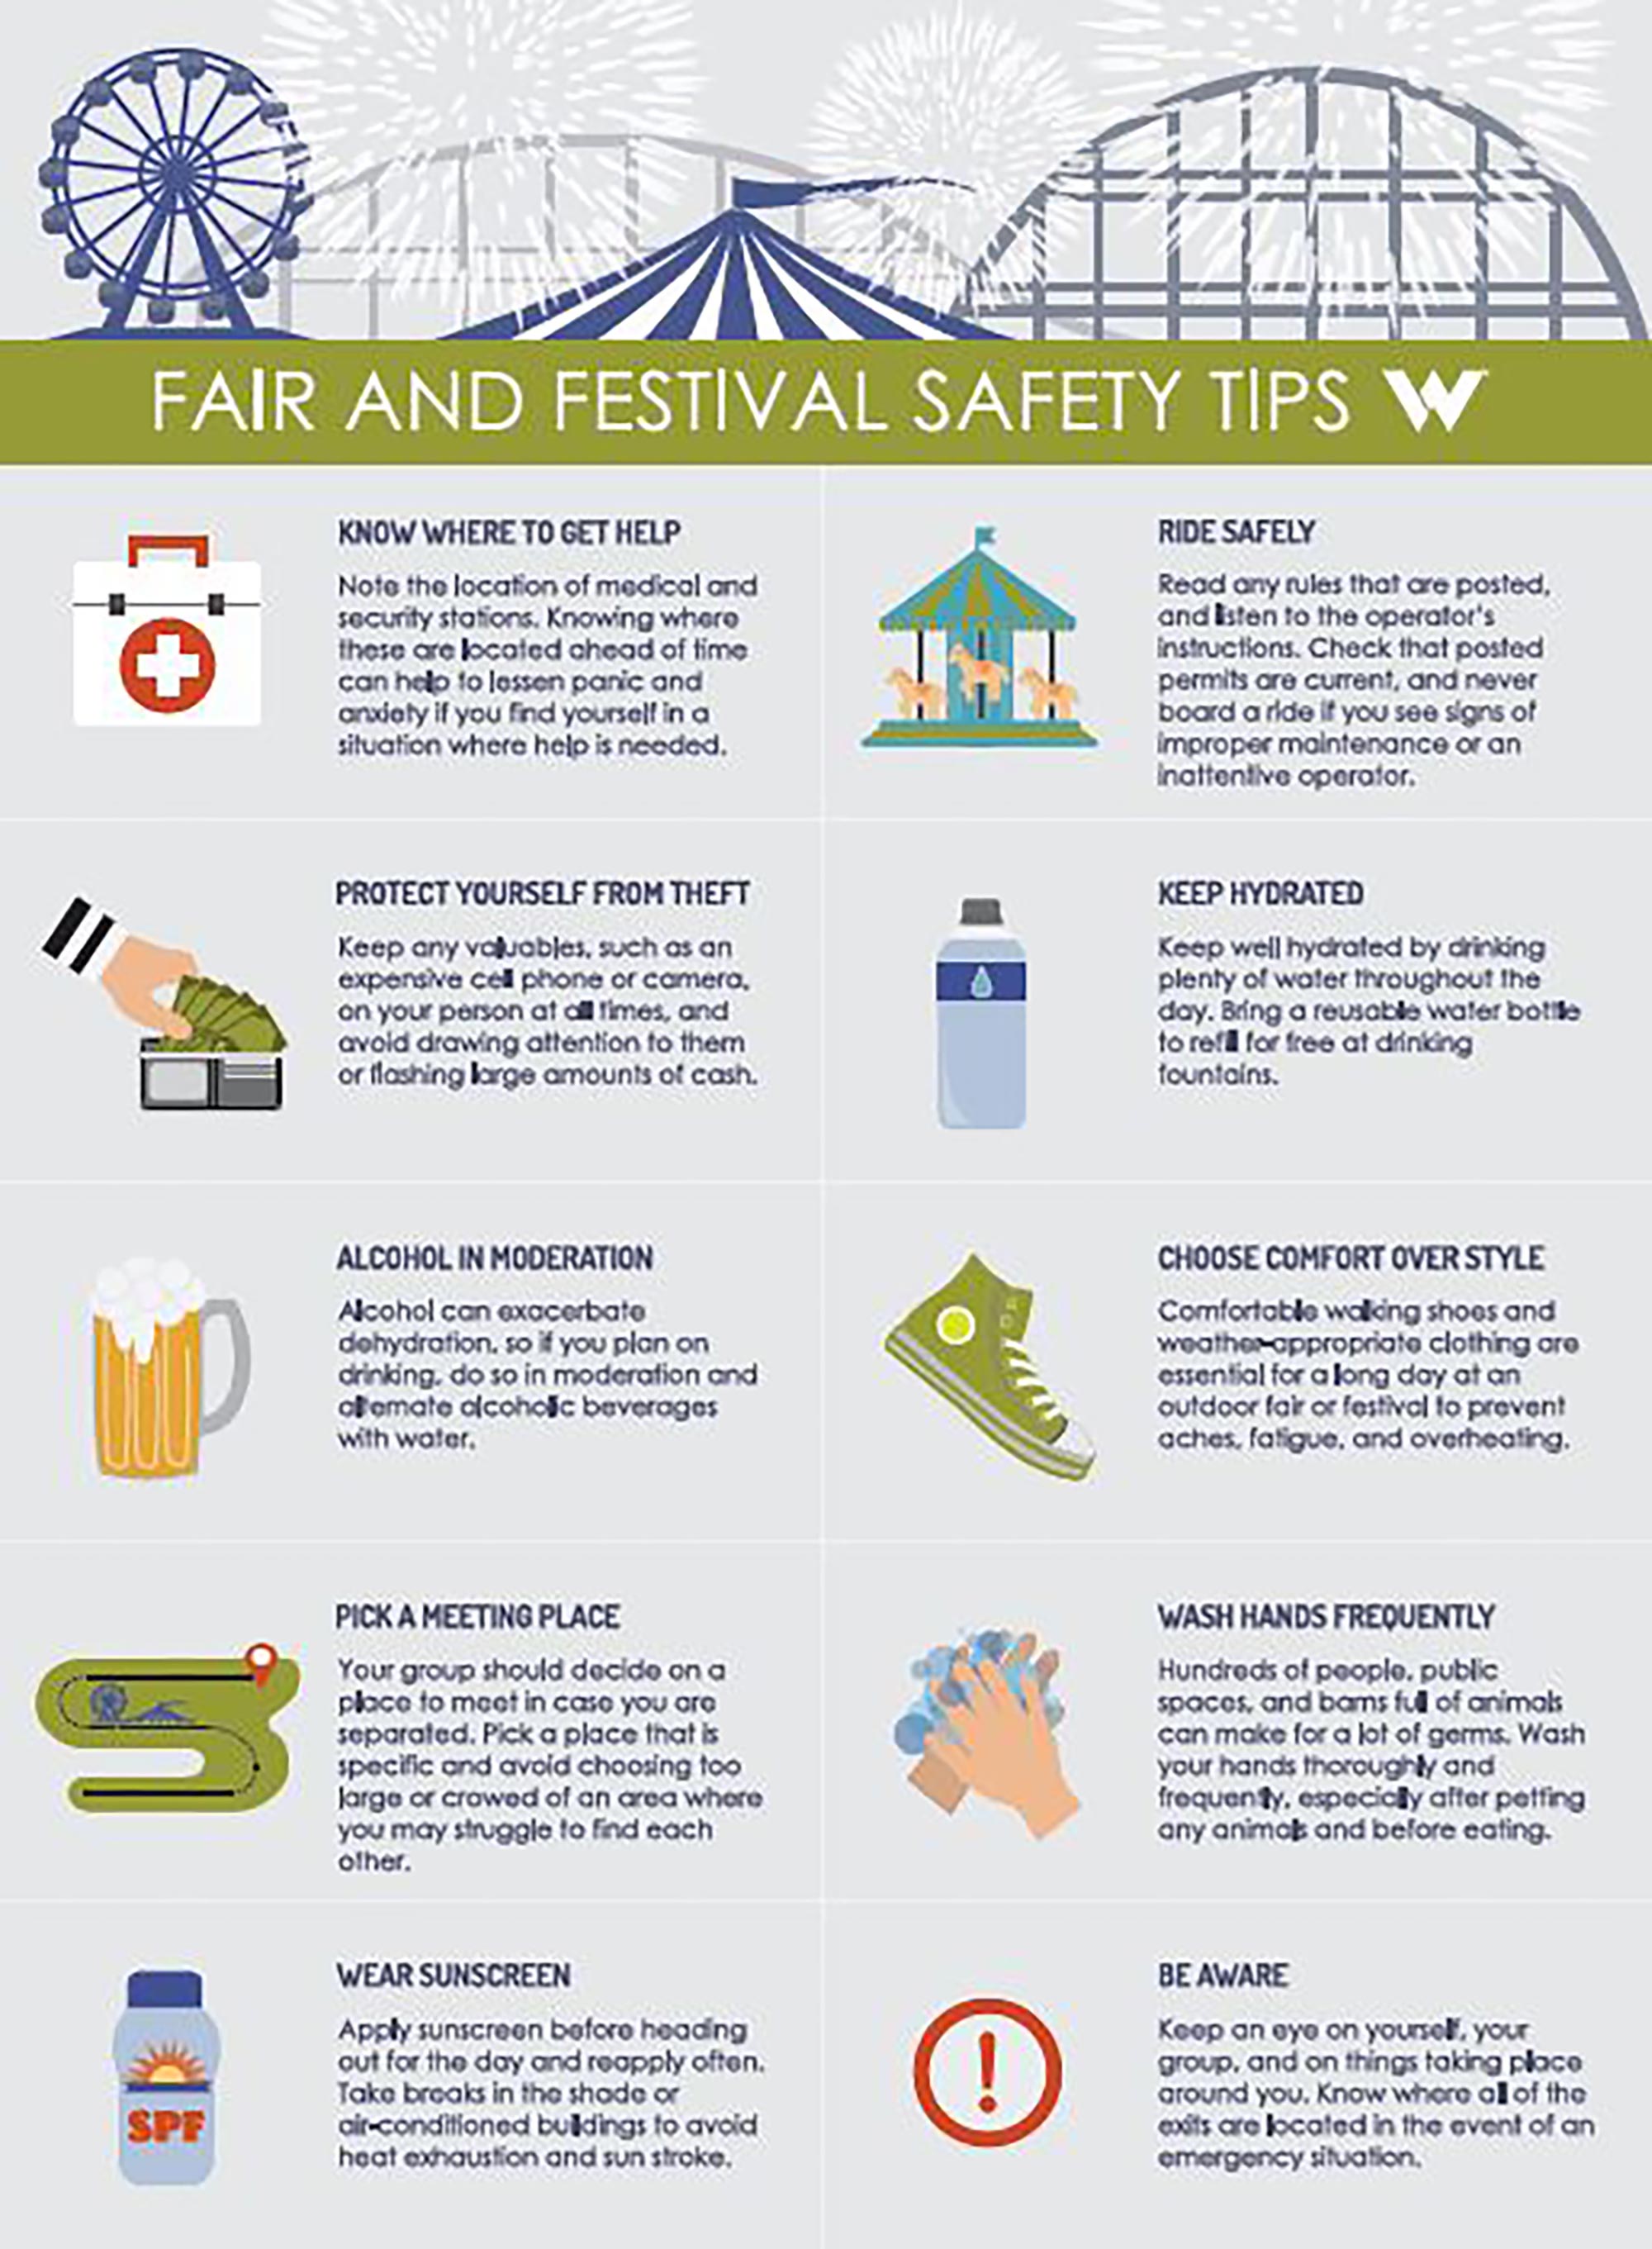 infographic with fair and fetival safety tips.